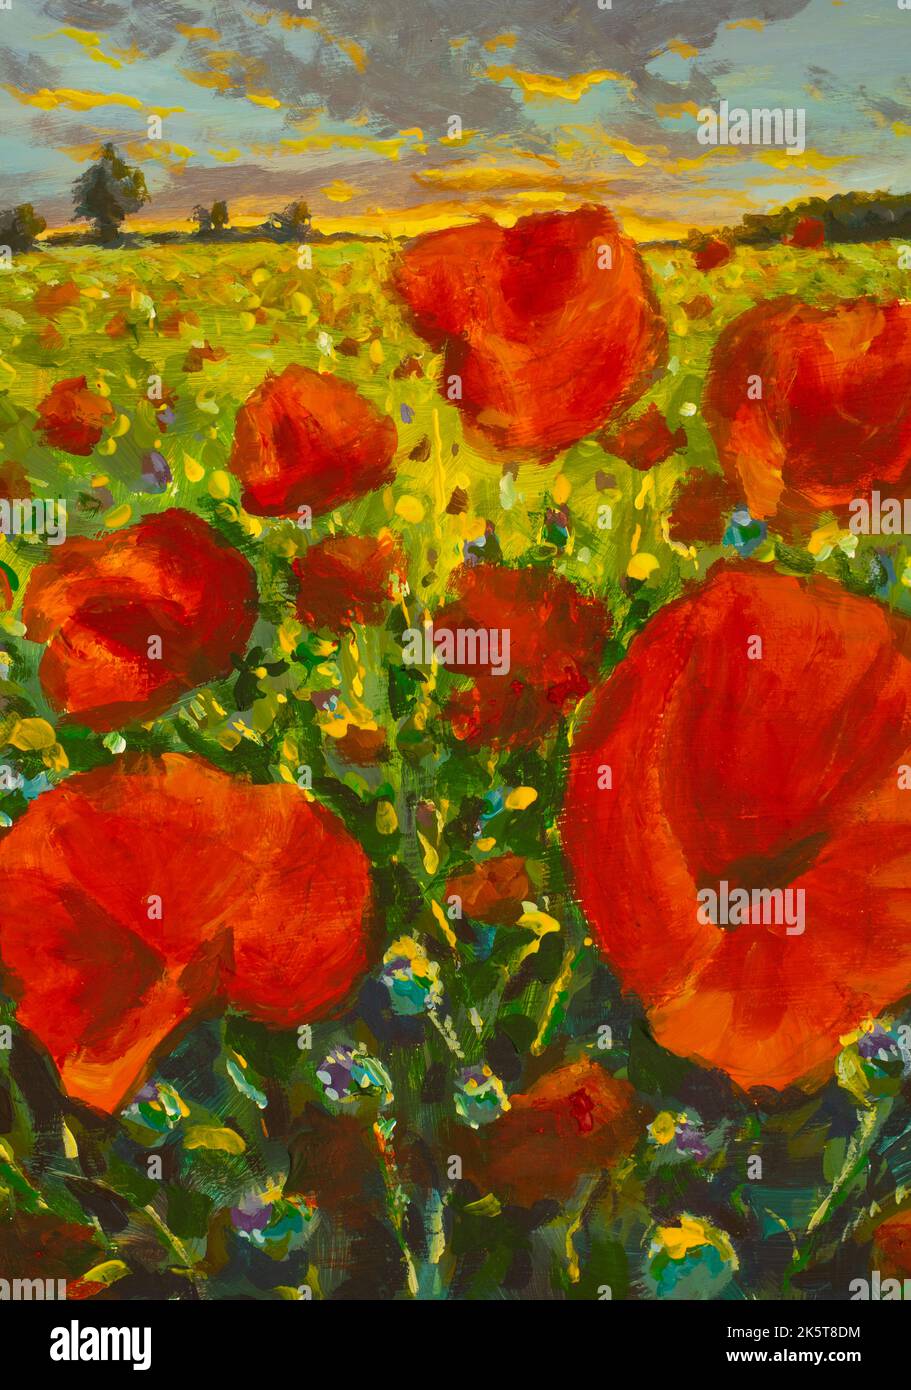 Large red flowers poppies in meadow impressionism Oil painting poppy field at sunset artwork Stock Photo